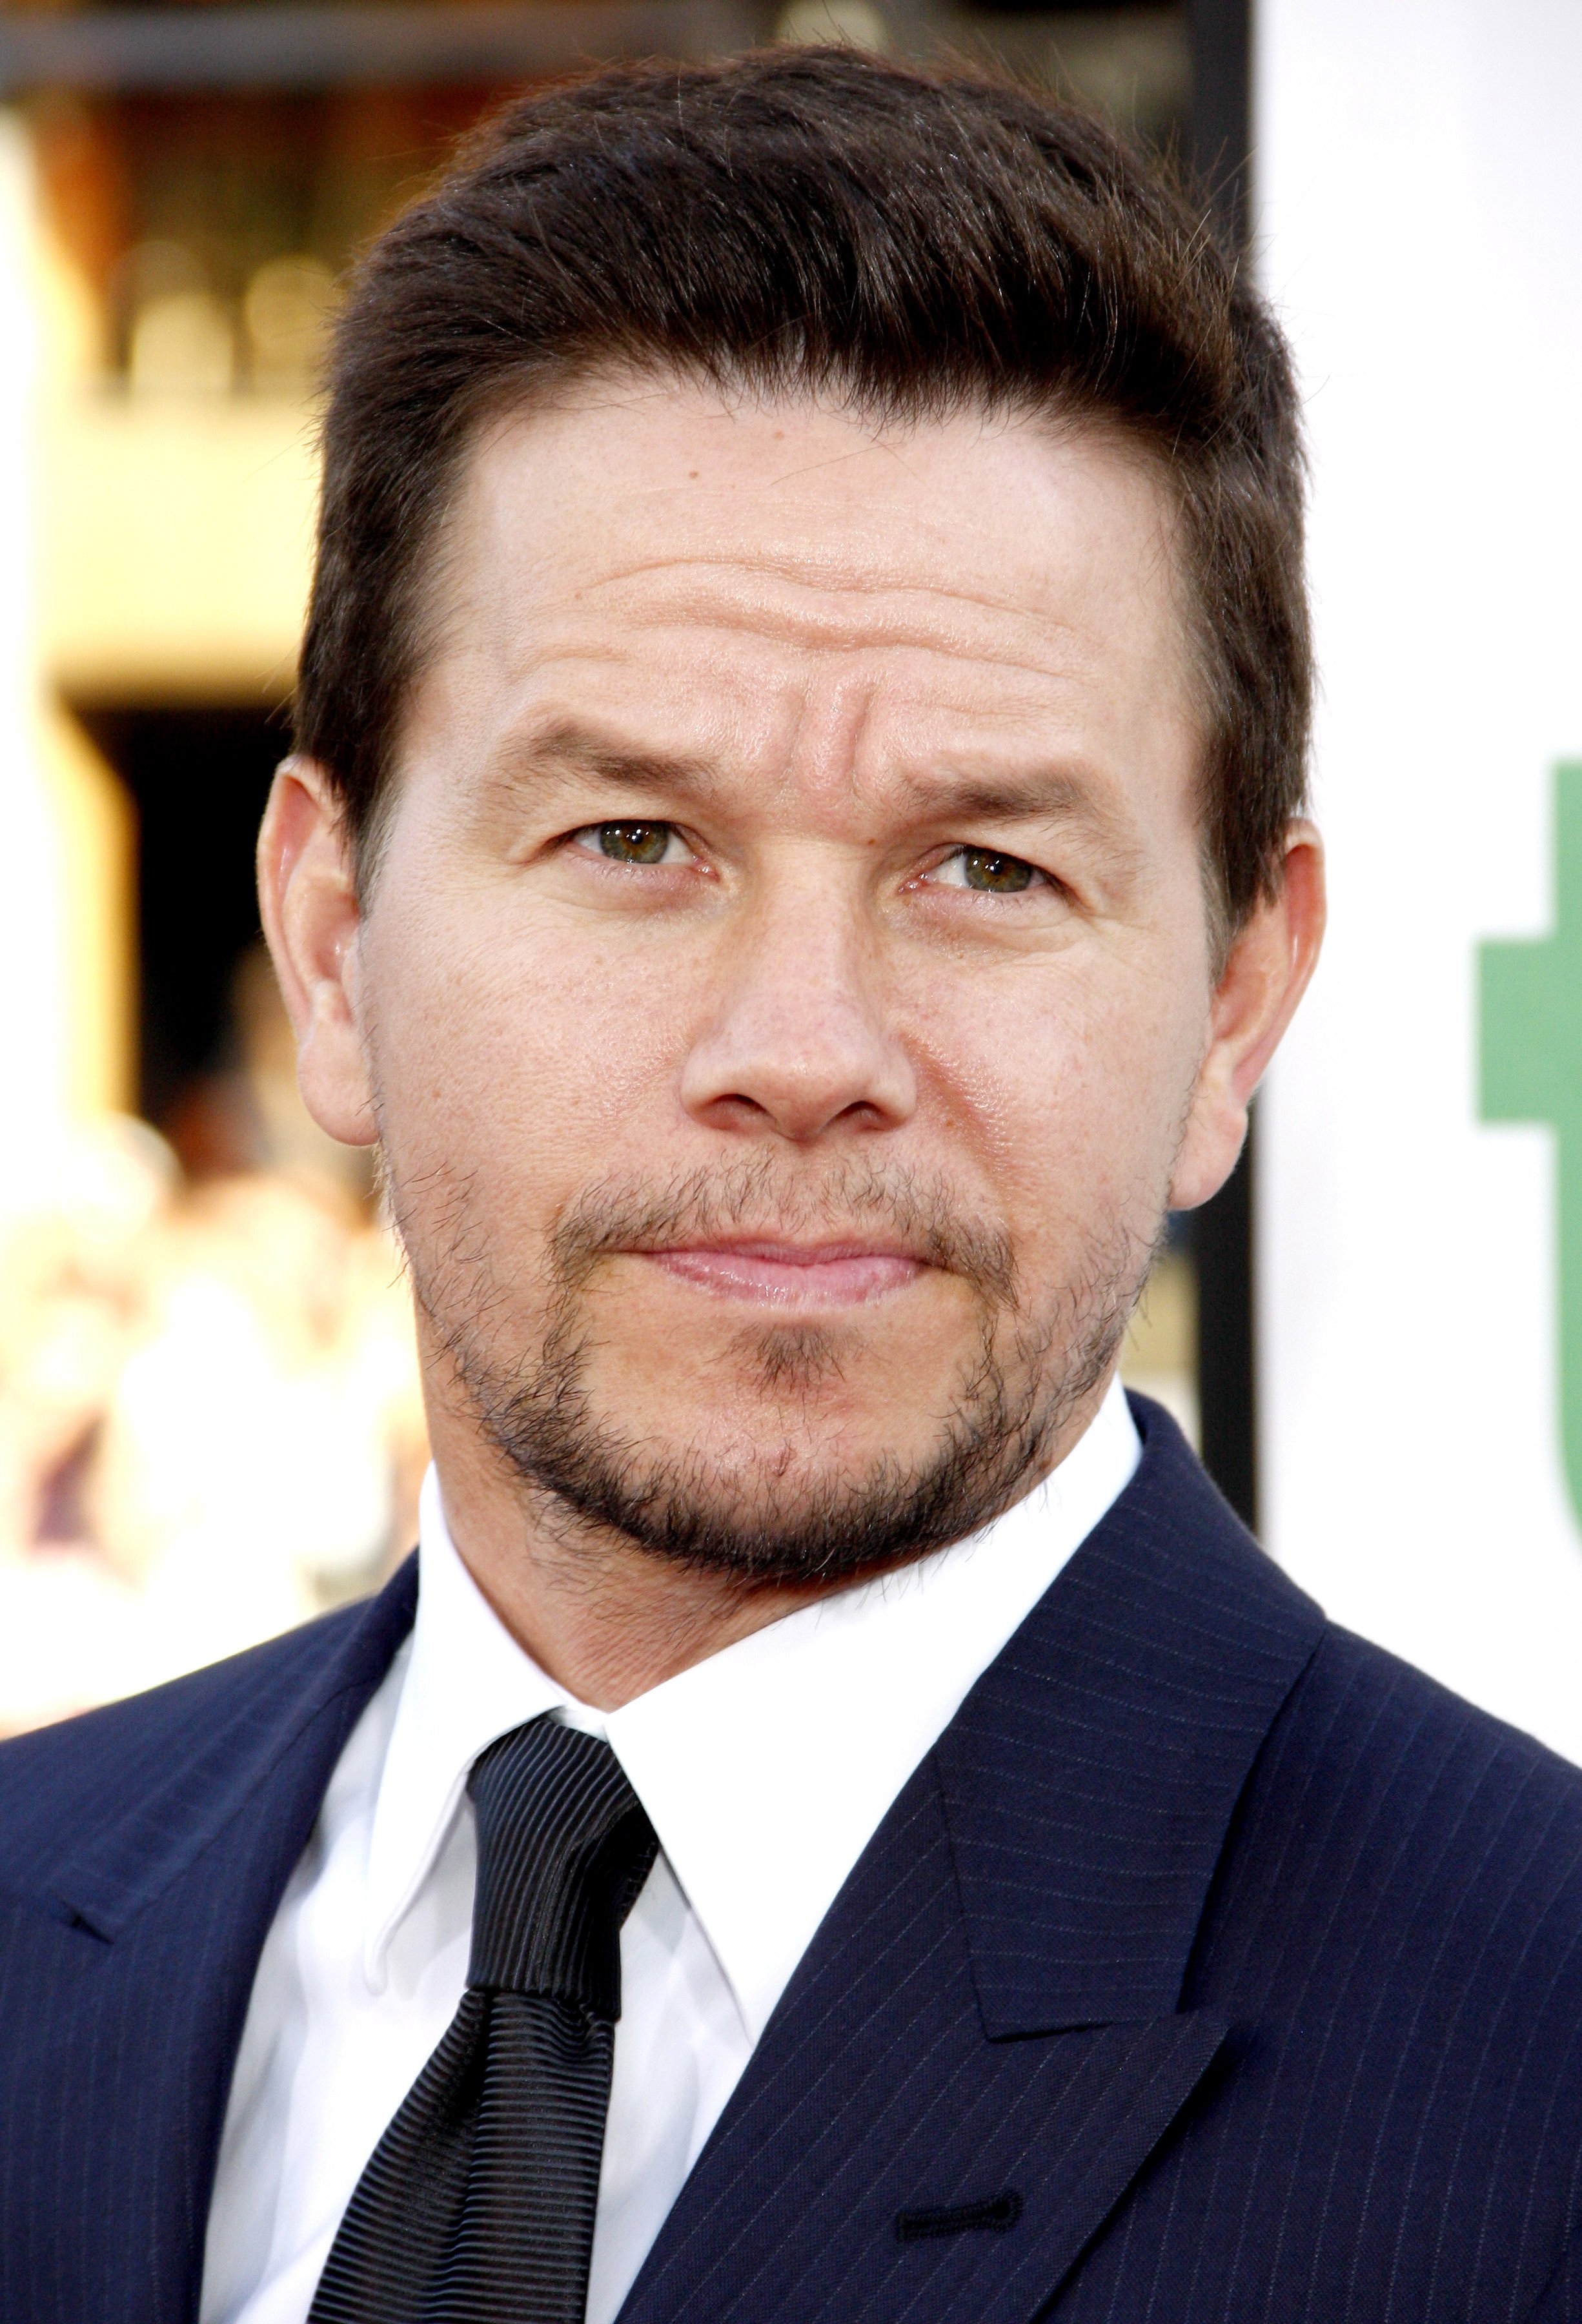 Mark Wahlberg at the movie premiere of "Ted" on June 21, 2012 in Los Angeles, California, | Photo: Shutterstock